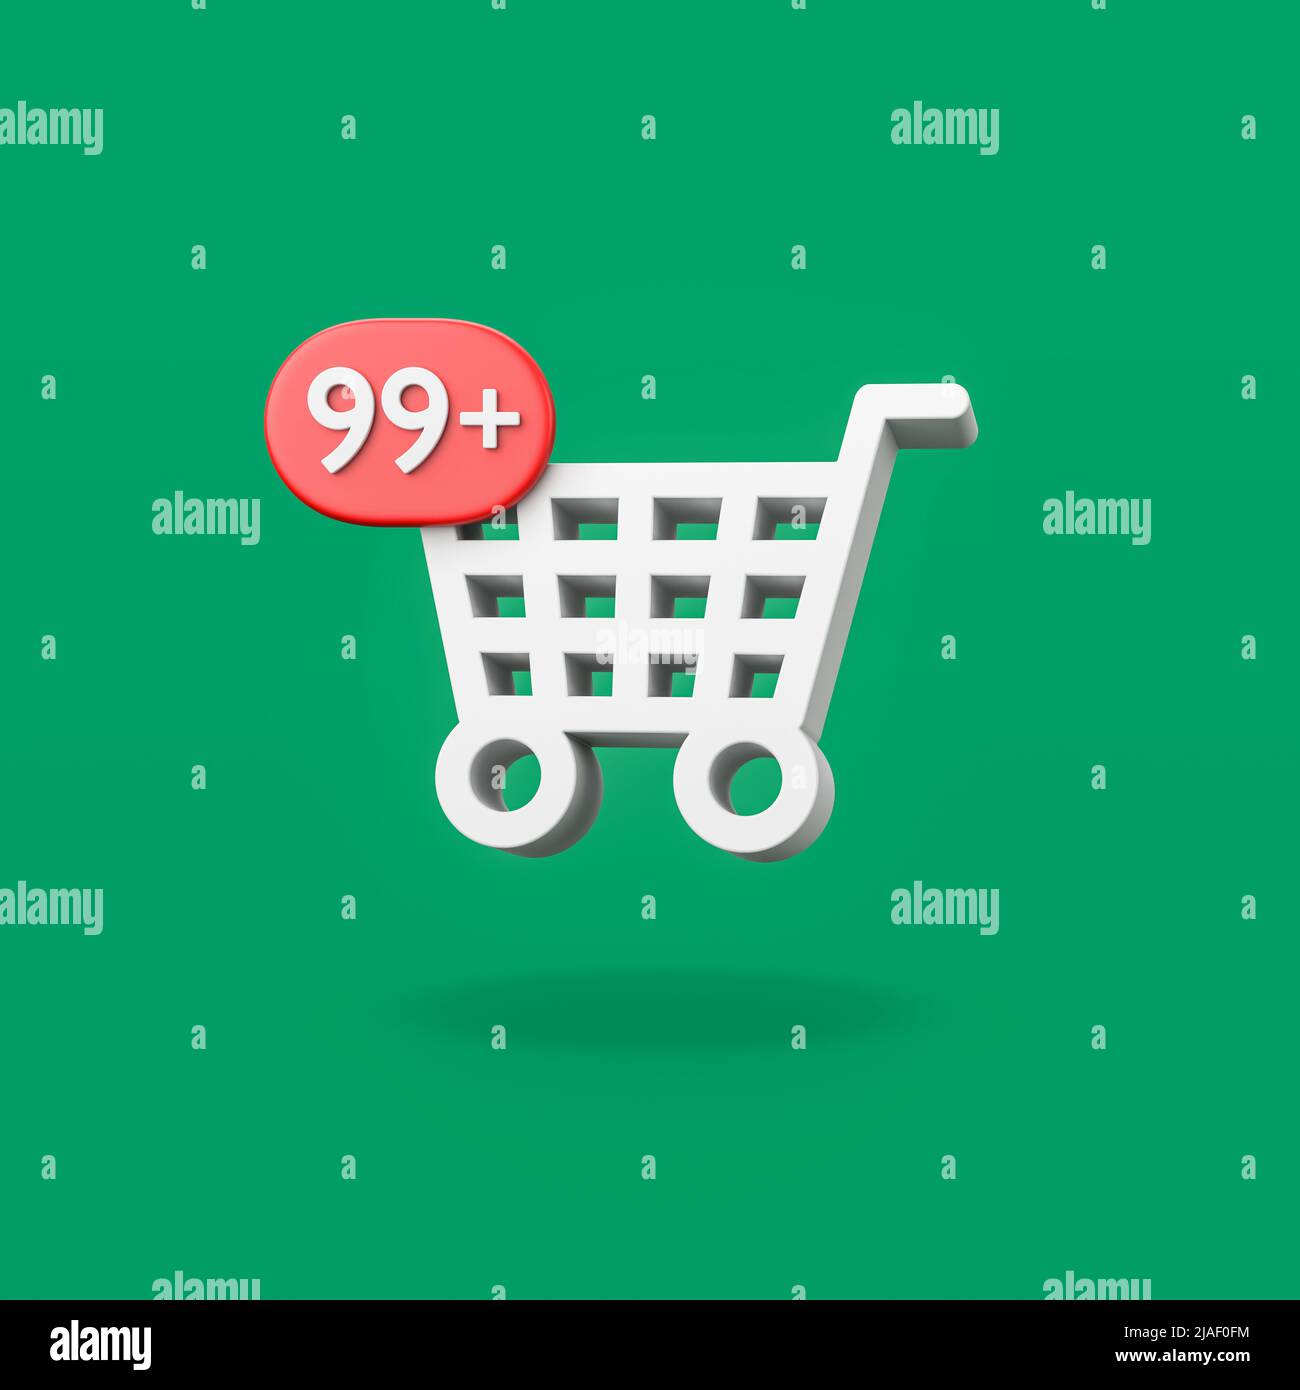 Shopping Cart Shape with 99 Notification on Green Background Stock Photo